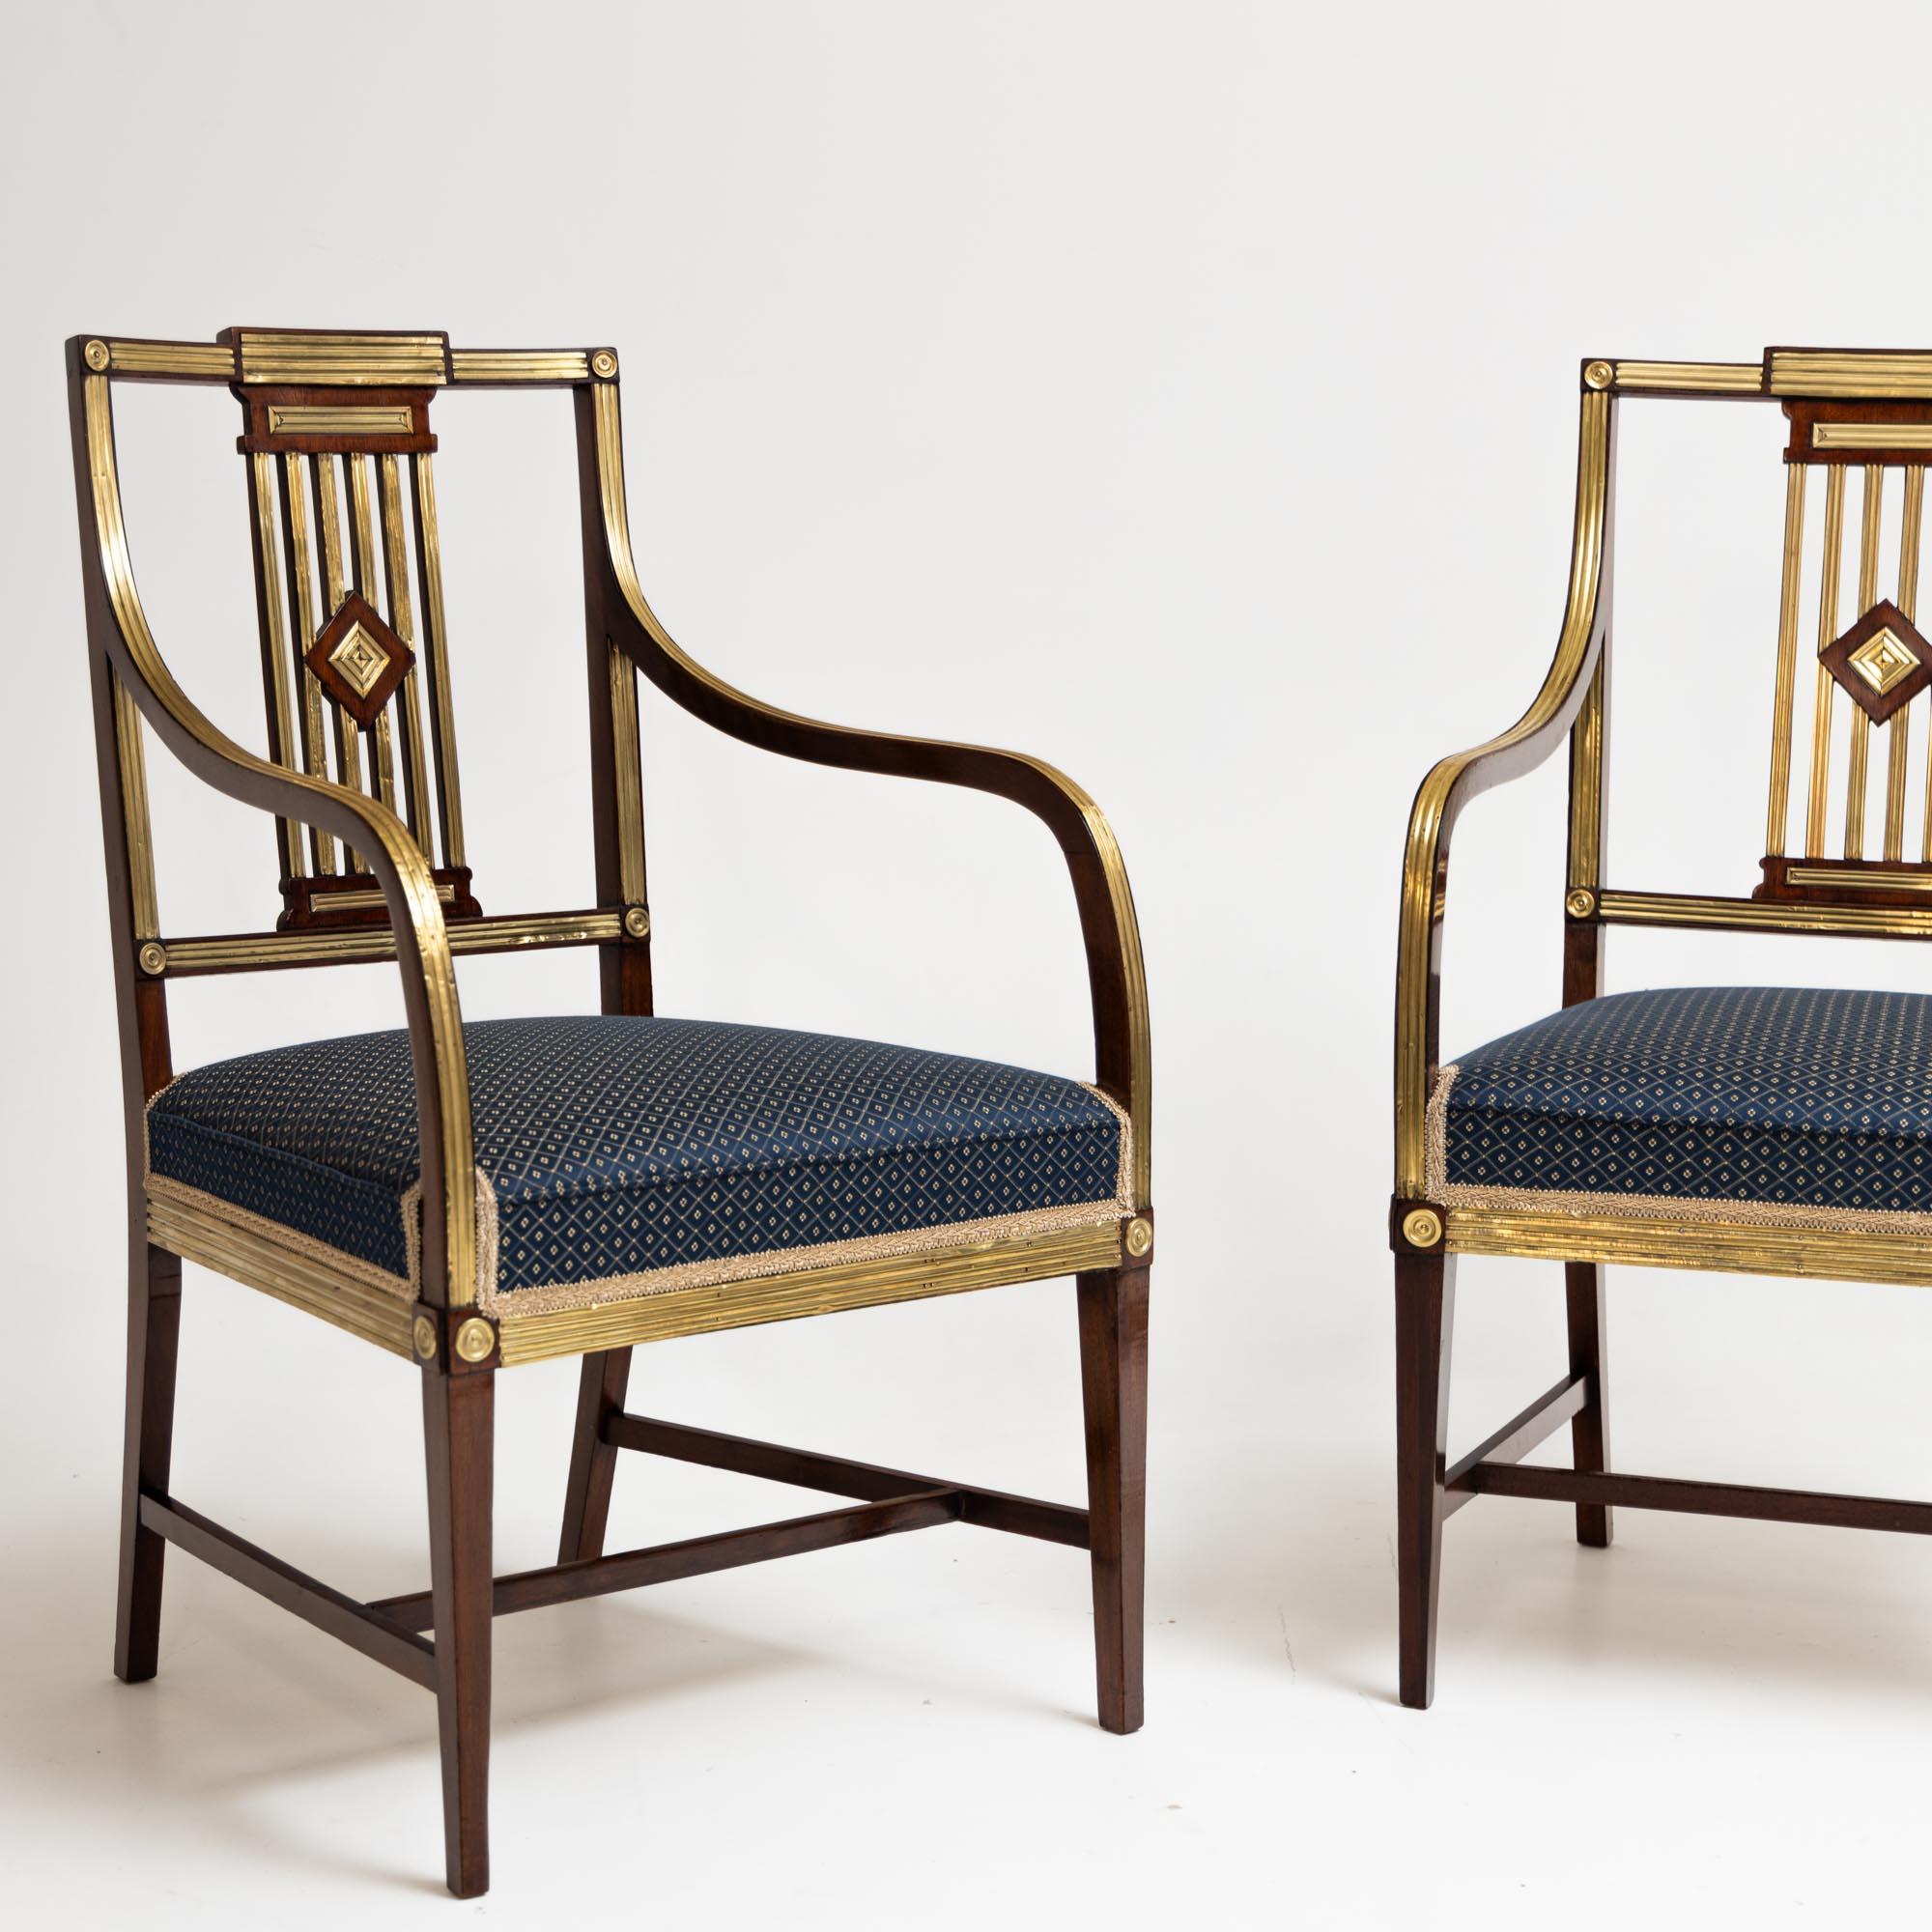 Polished Pair of Neoclassical Dining Room Chairs, Brass, Baltic States, Late 18th Century For Sale